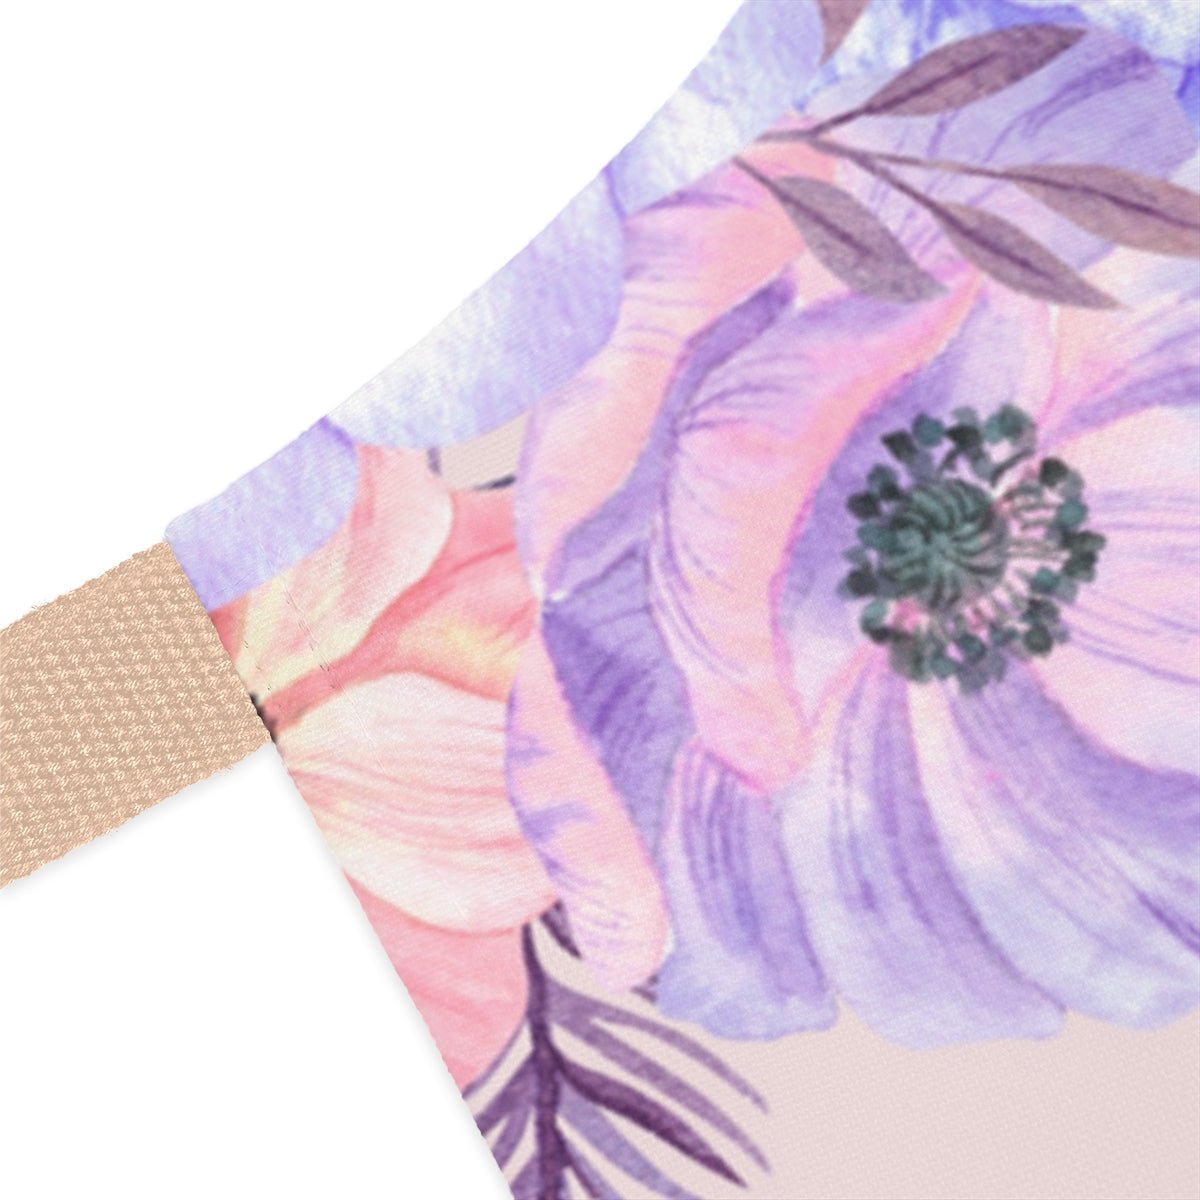 Very Peri Anemones Apron - Puffin Lime